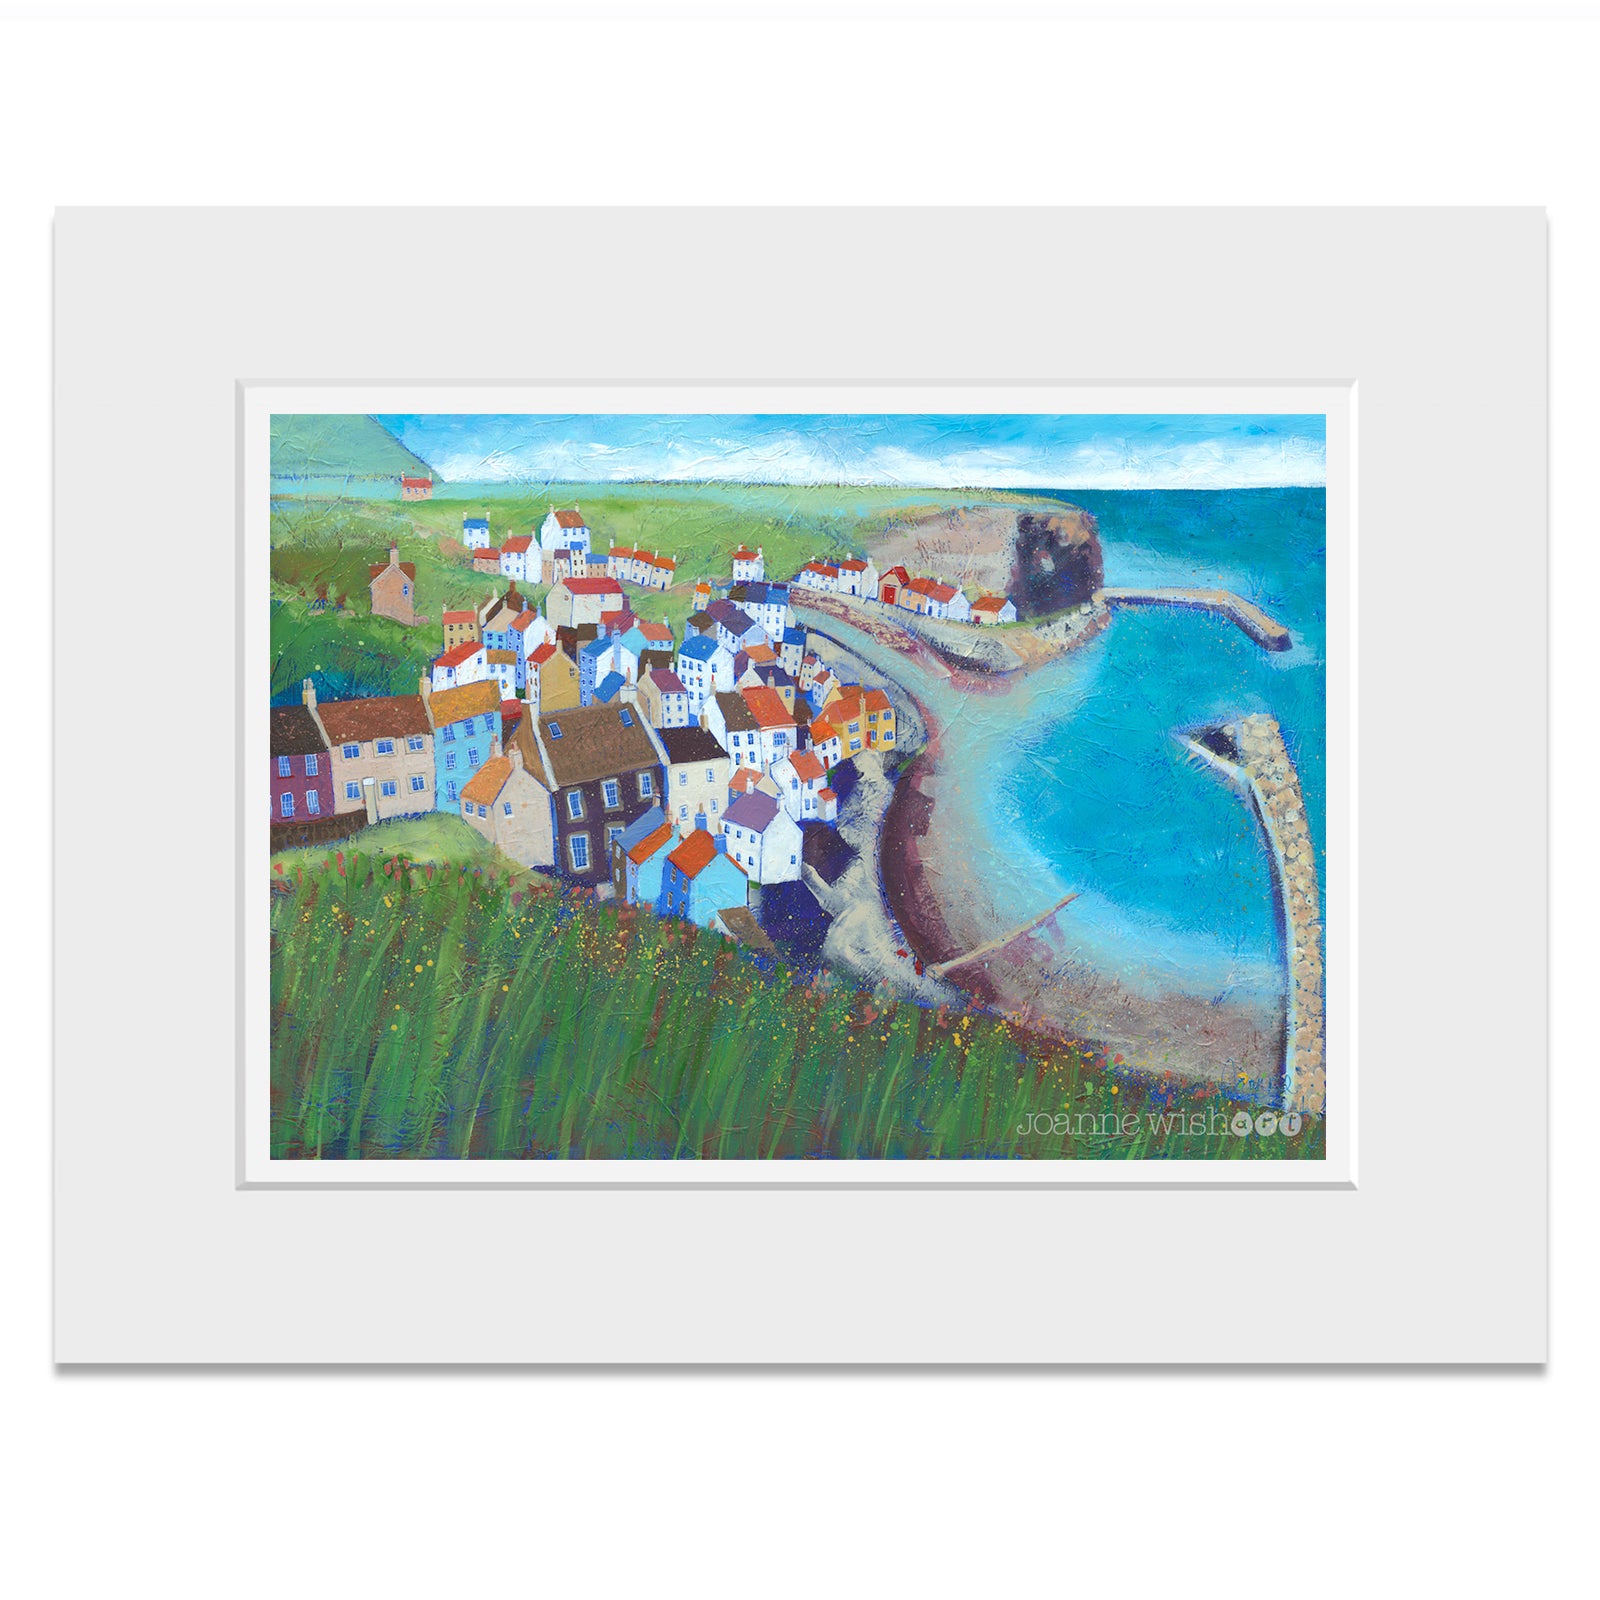 A mounted print of sunny Staithes as seen from the cliff top.